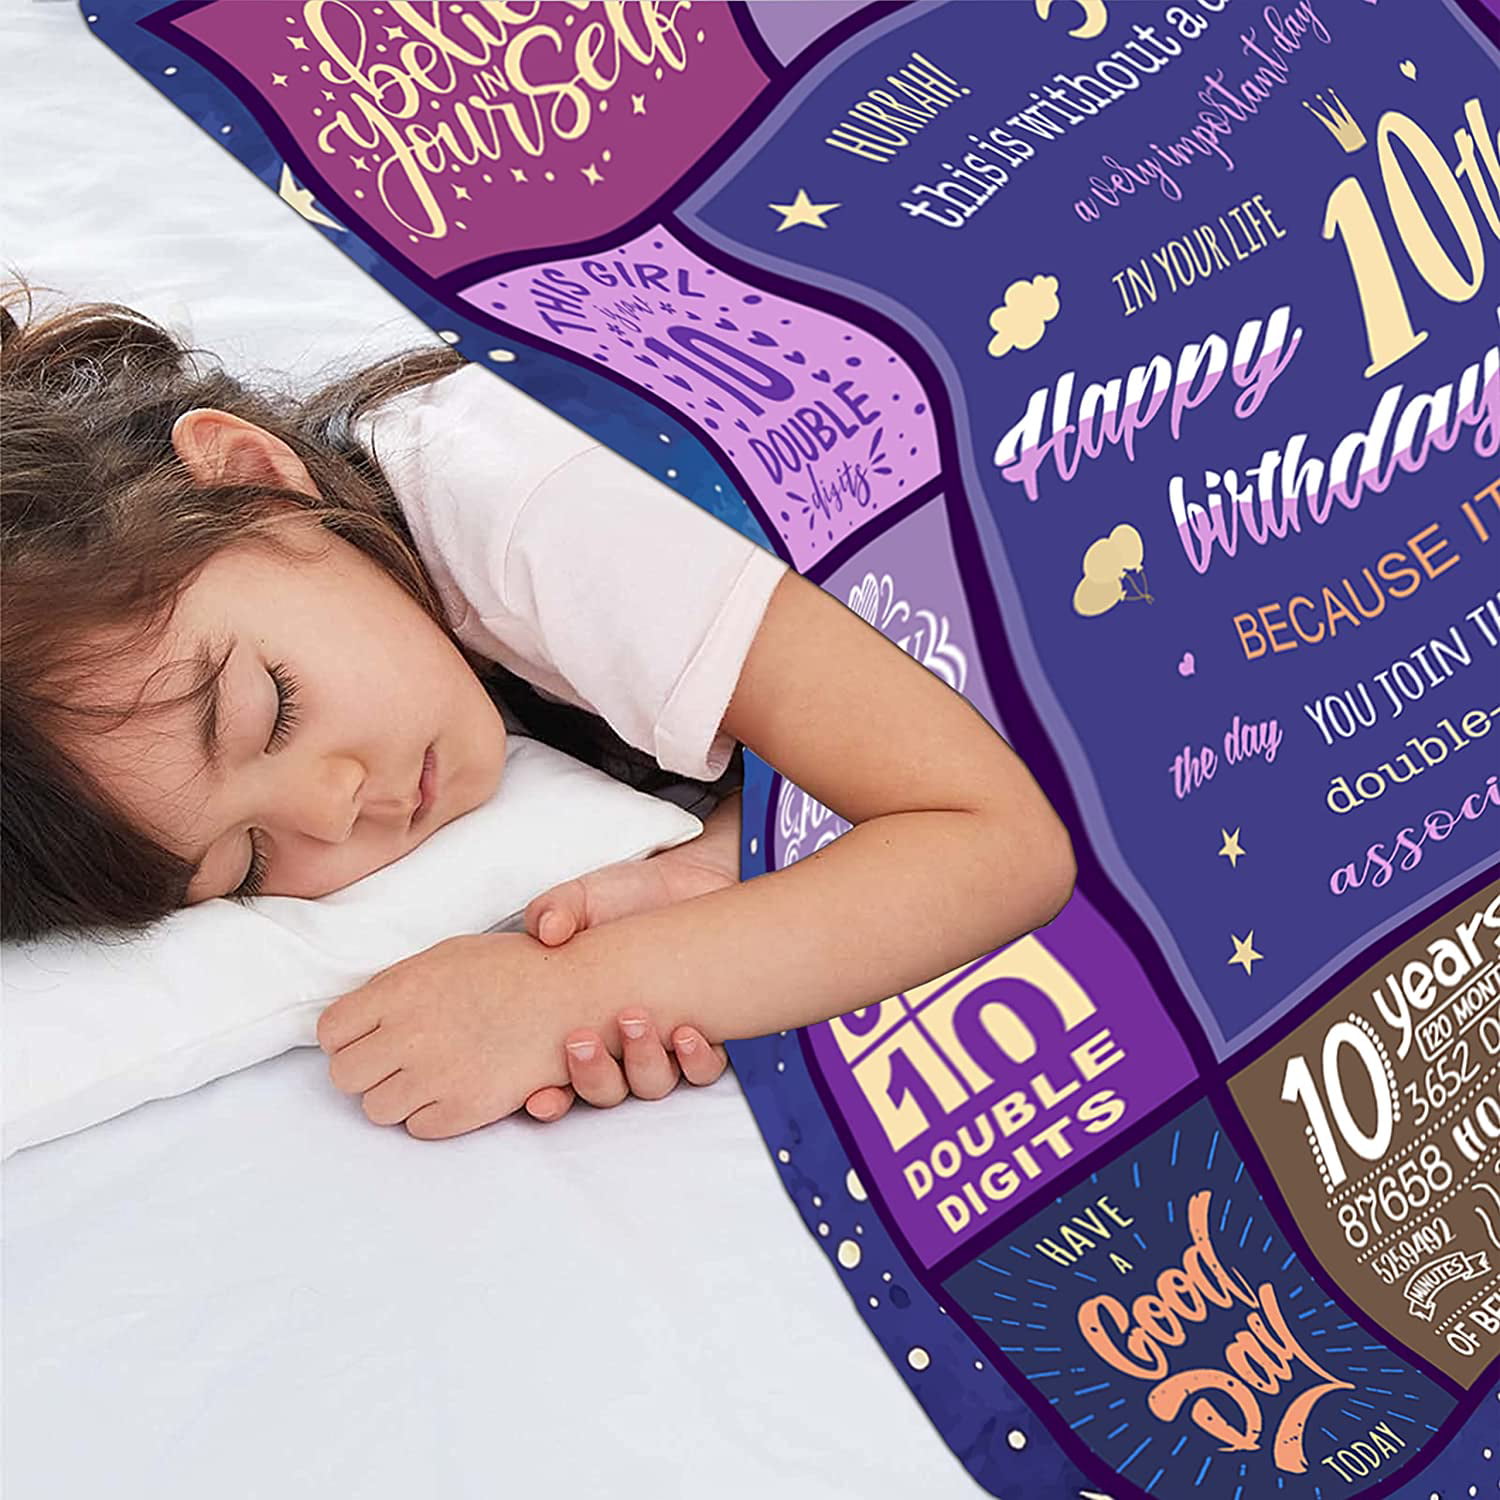  Budalagong Birthday Gifts for 13 Year Old Girls, 13th Birthday  Gifts with Gift Box, 13 Year Old Girl Gift Ideas, 13 Birthday Decorations  for Girls Blanket 60''x50'' Travelling Rugs : Home